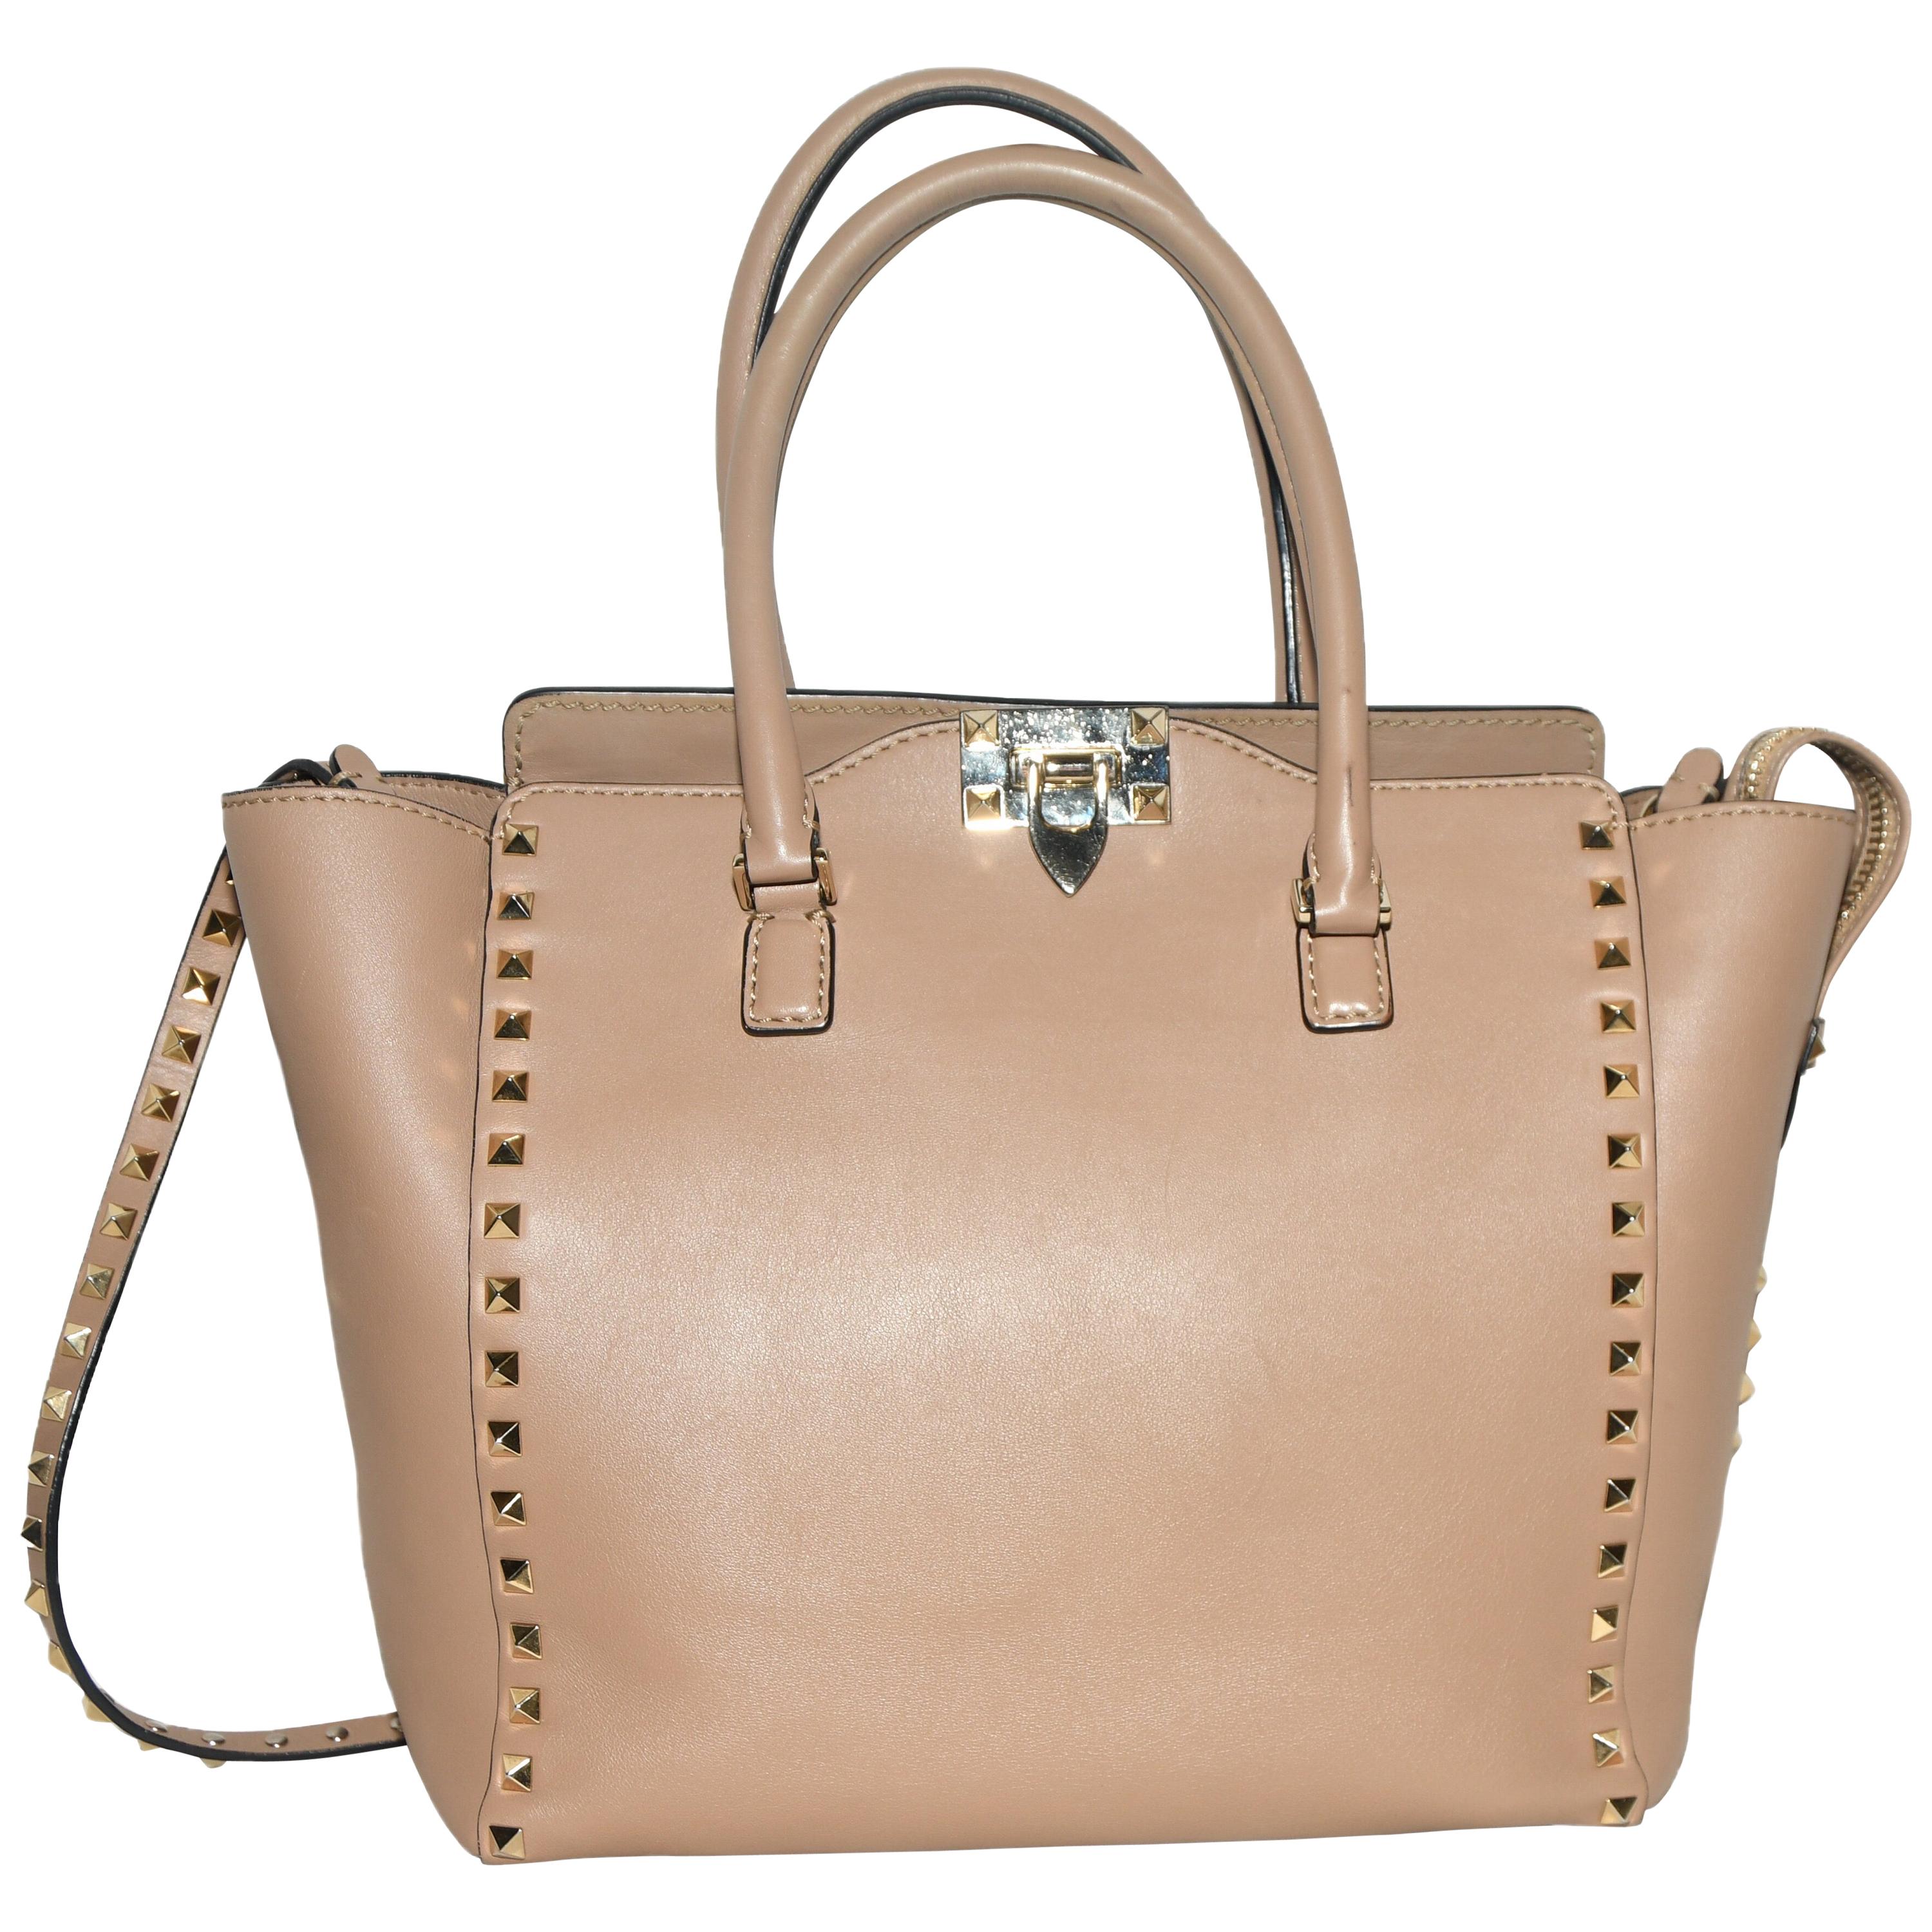 Valentino Rockstud Top Handle Taupe Leather Tote Bag